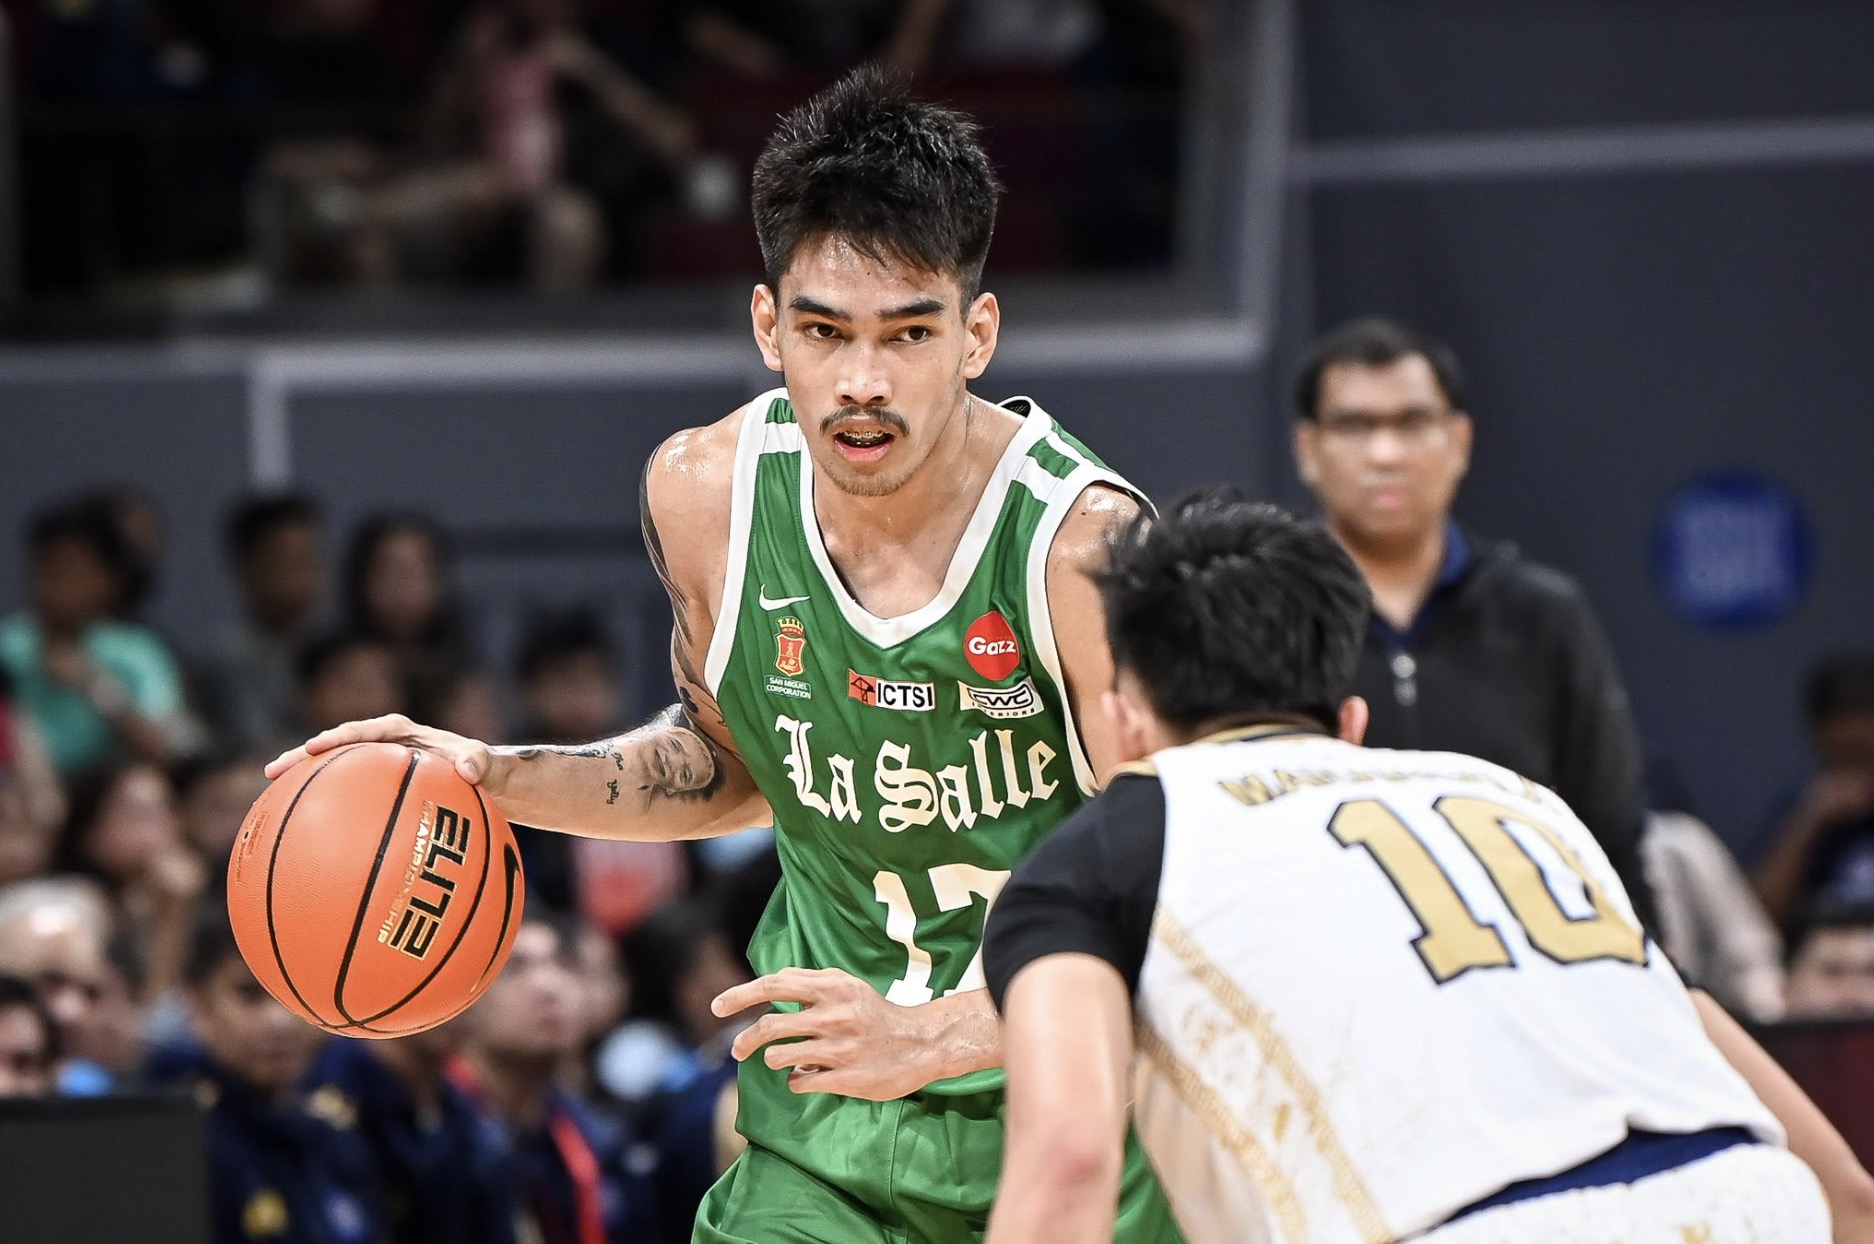 Kevin Quiambao leads the UAAP Season 86 men's basketball MVP race after round 1 of eliminations